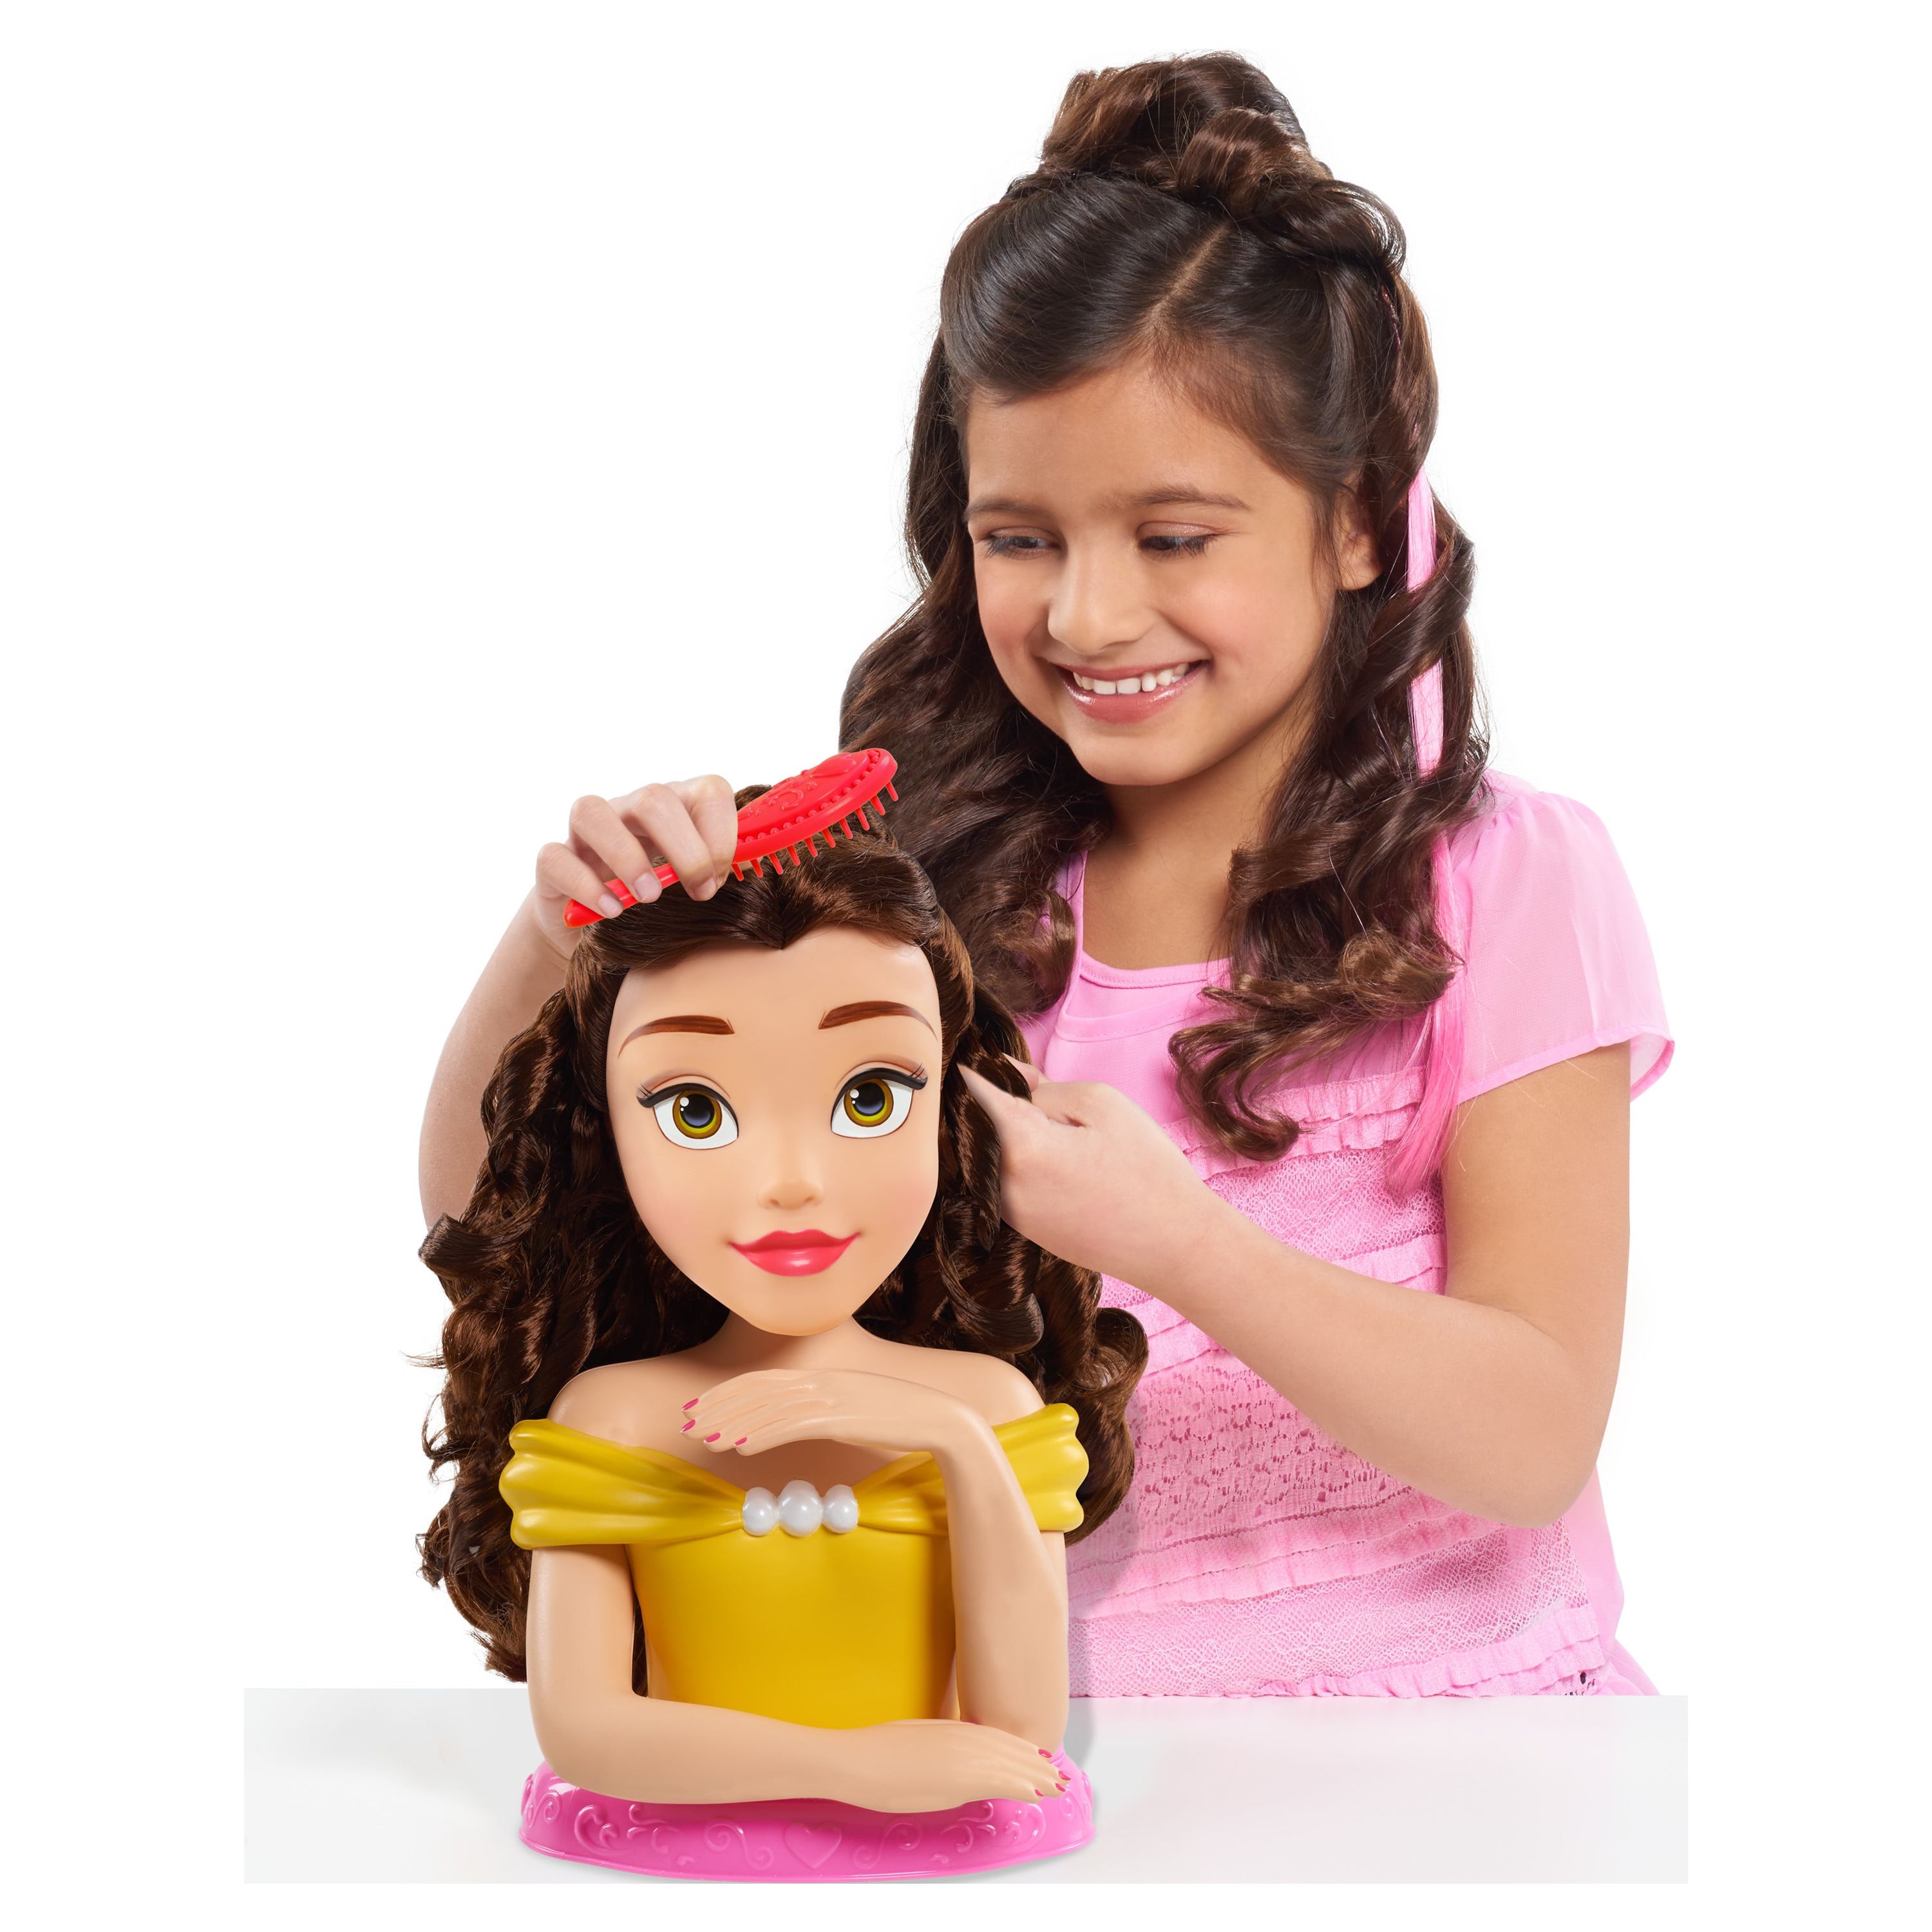 Disney Princess Deluxe Belle Styling Head, 13-pieces, Officially Licensed Kids Toys for Ages 3 Up, Gifts and Presents - image 2 of 6